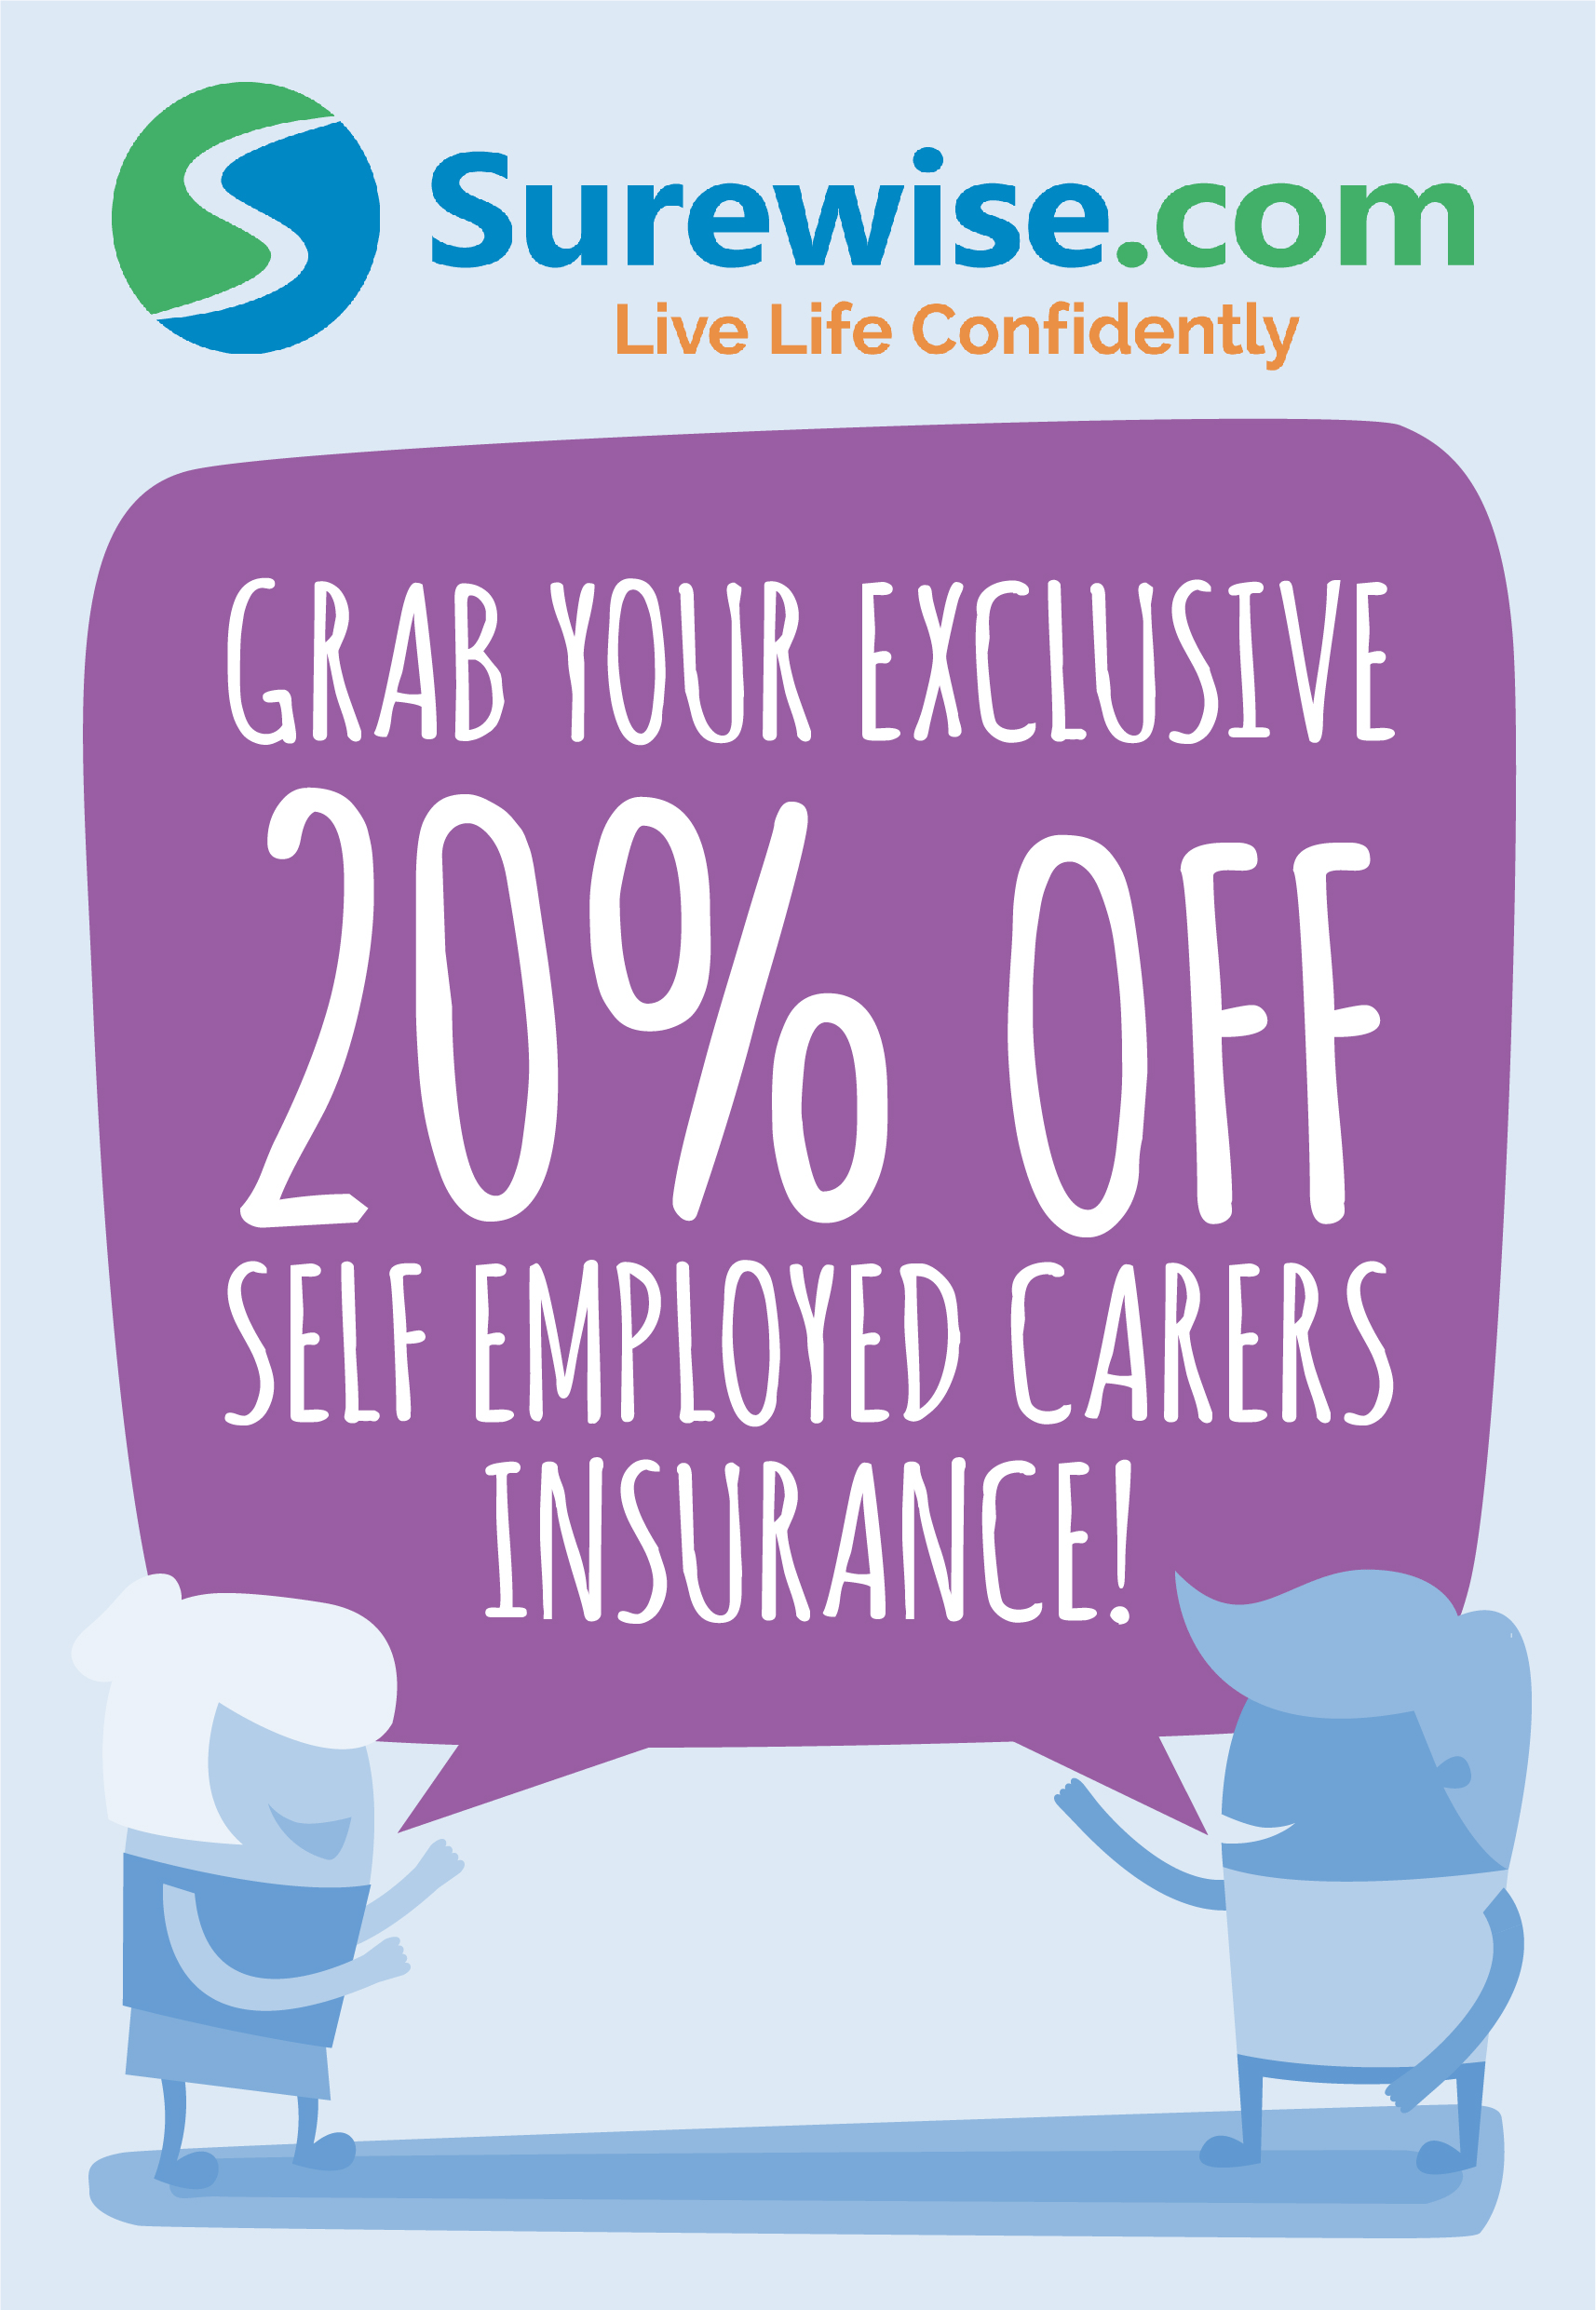 Grab your exclusive 20 percent off self employed carers insurance!